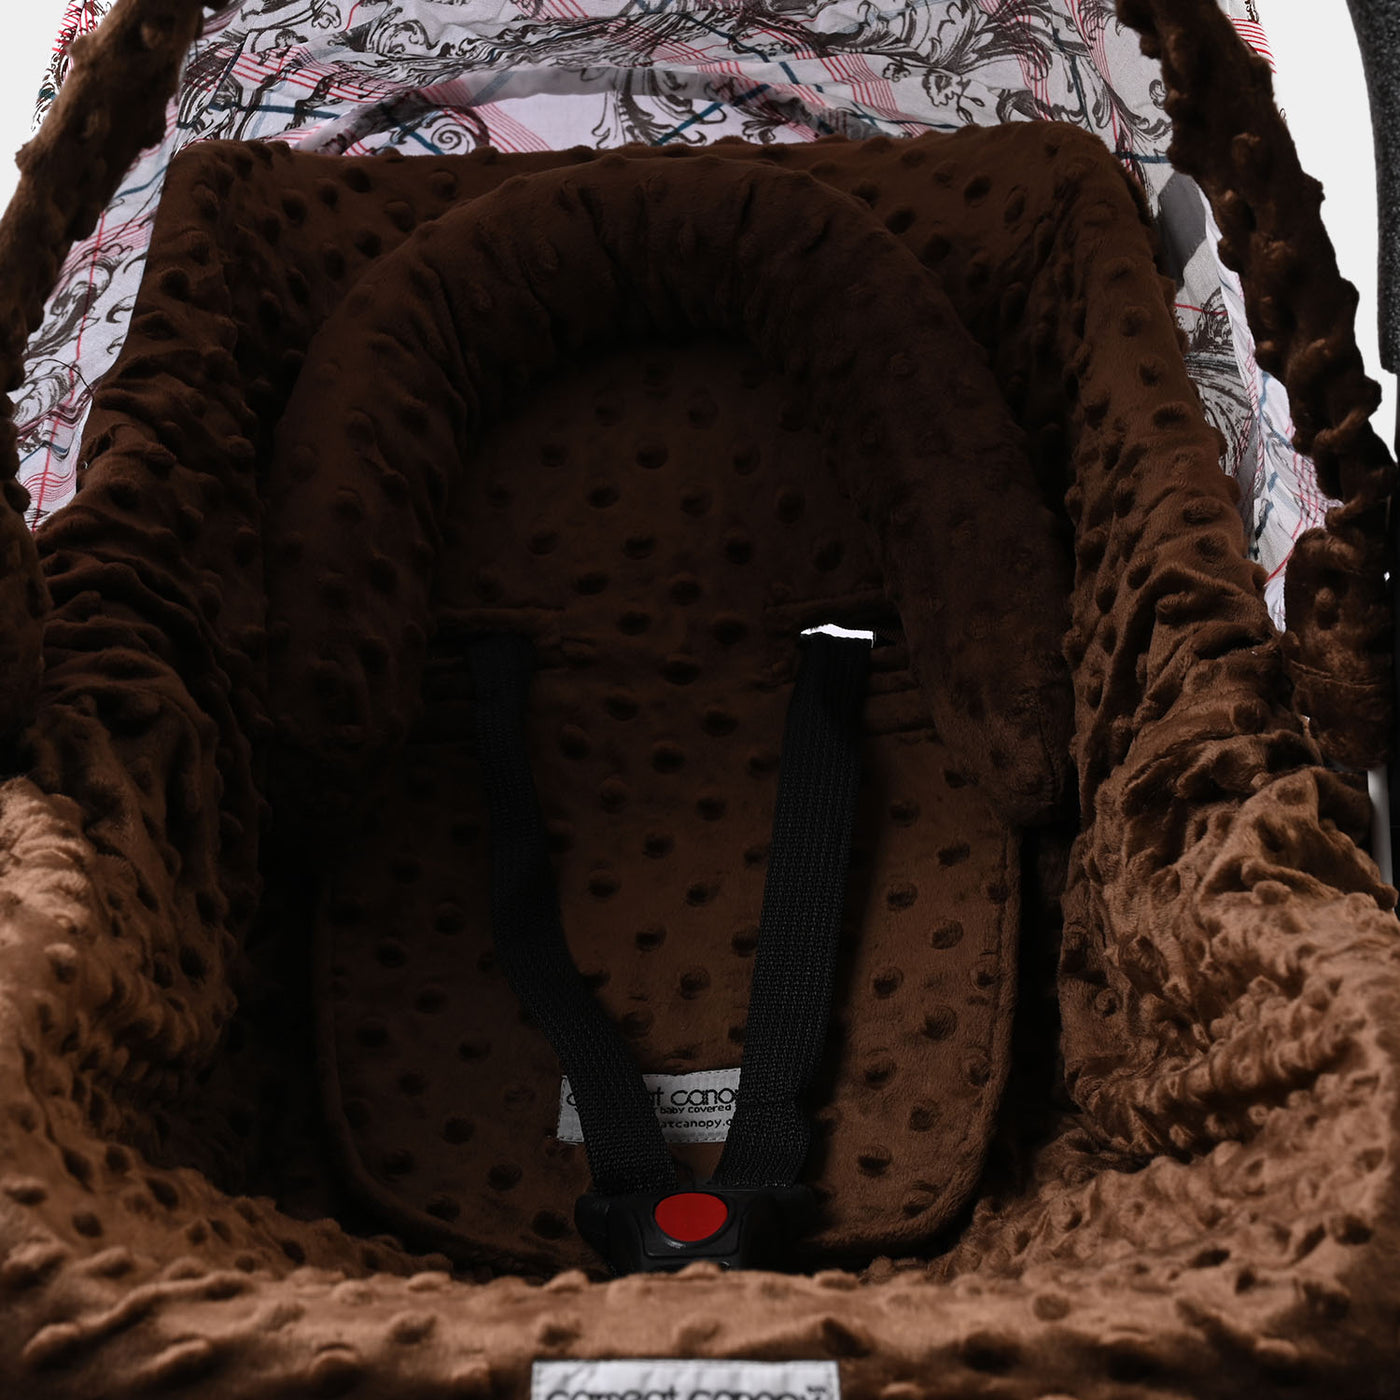 Carrycot Cover Set